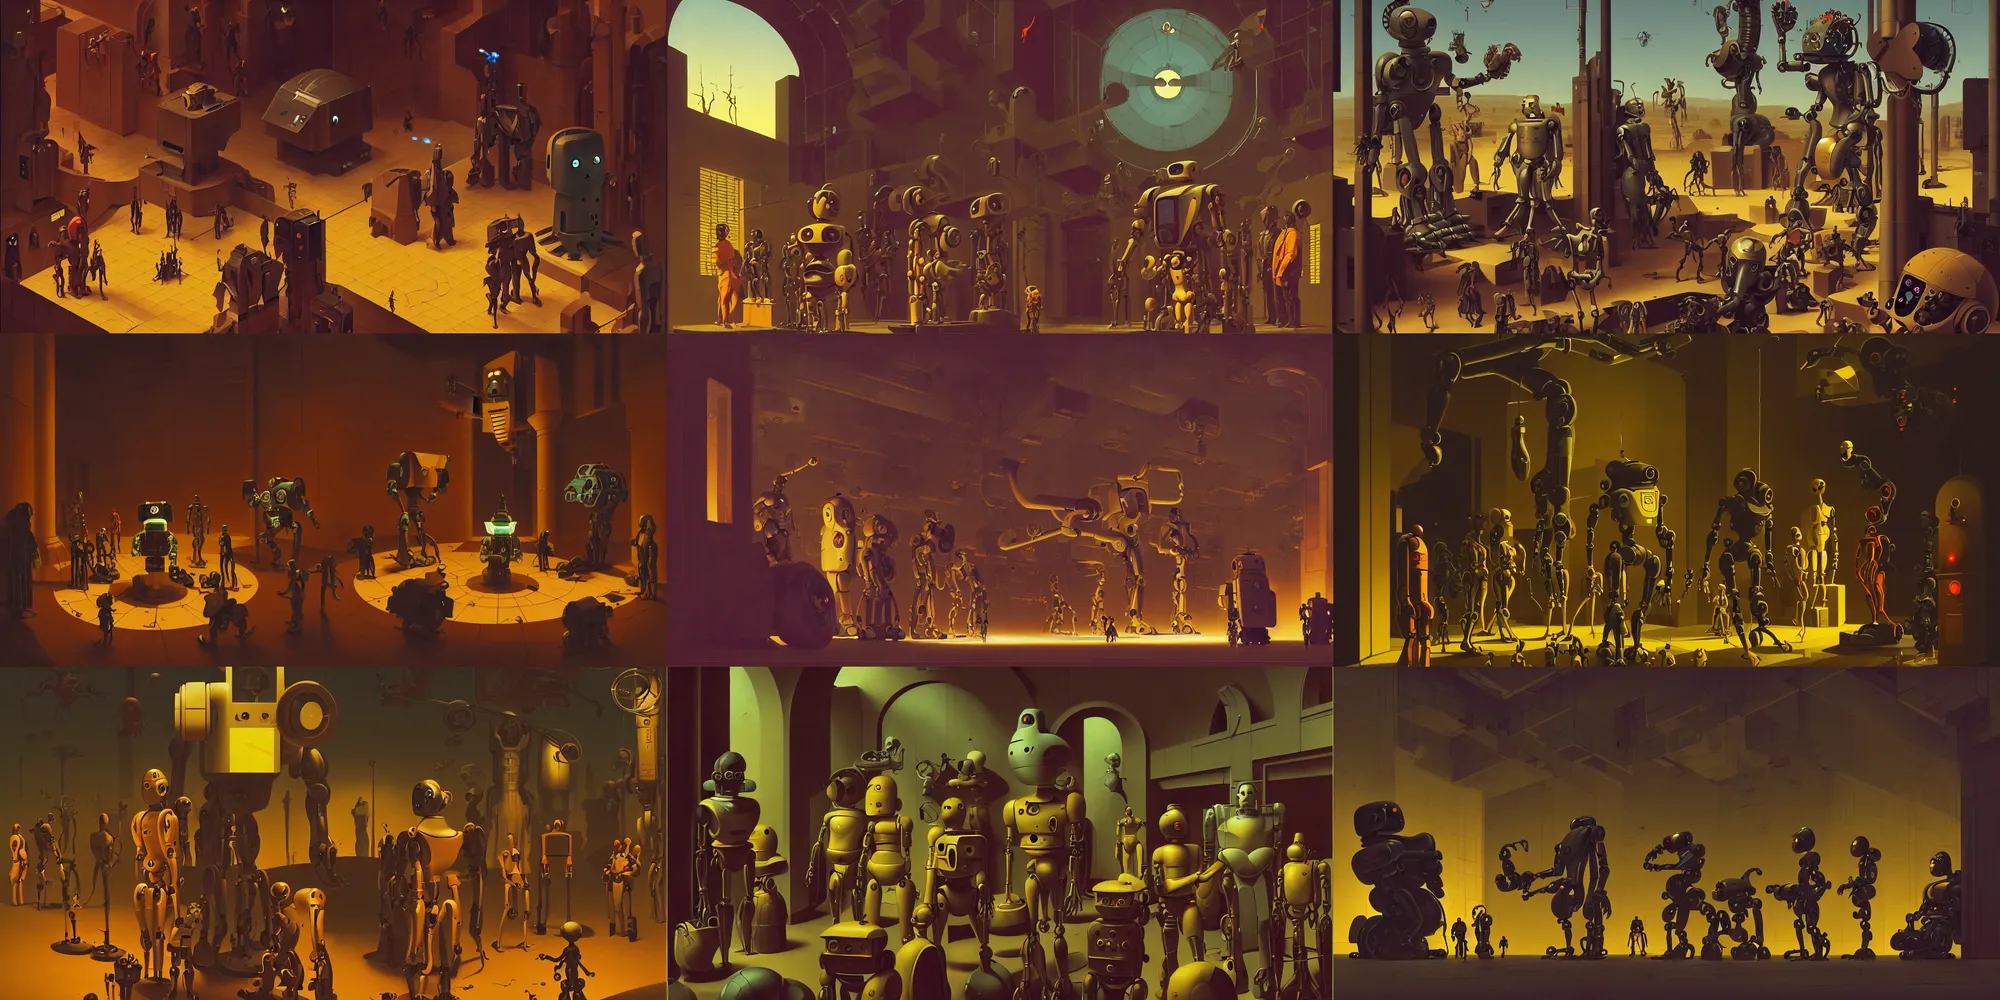 Prompt: robots and cyborgs are waiting at the entrance of hell, art by syd mead mike mignola fernando de felipe david rubin, composition by simon stalenhag hieronymus bosch, soft lighting, rule of thirds, golden ratio, fibonacci, phi